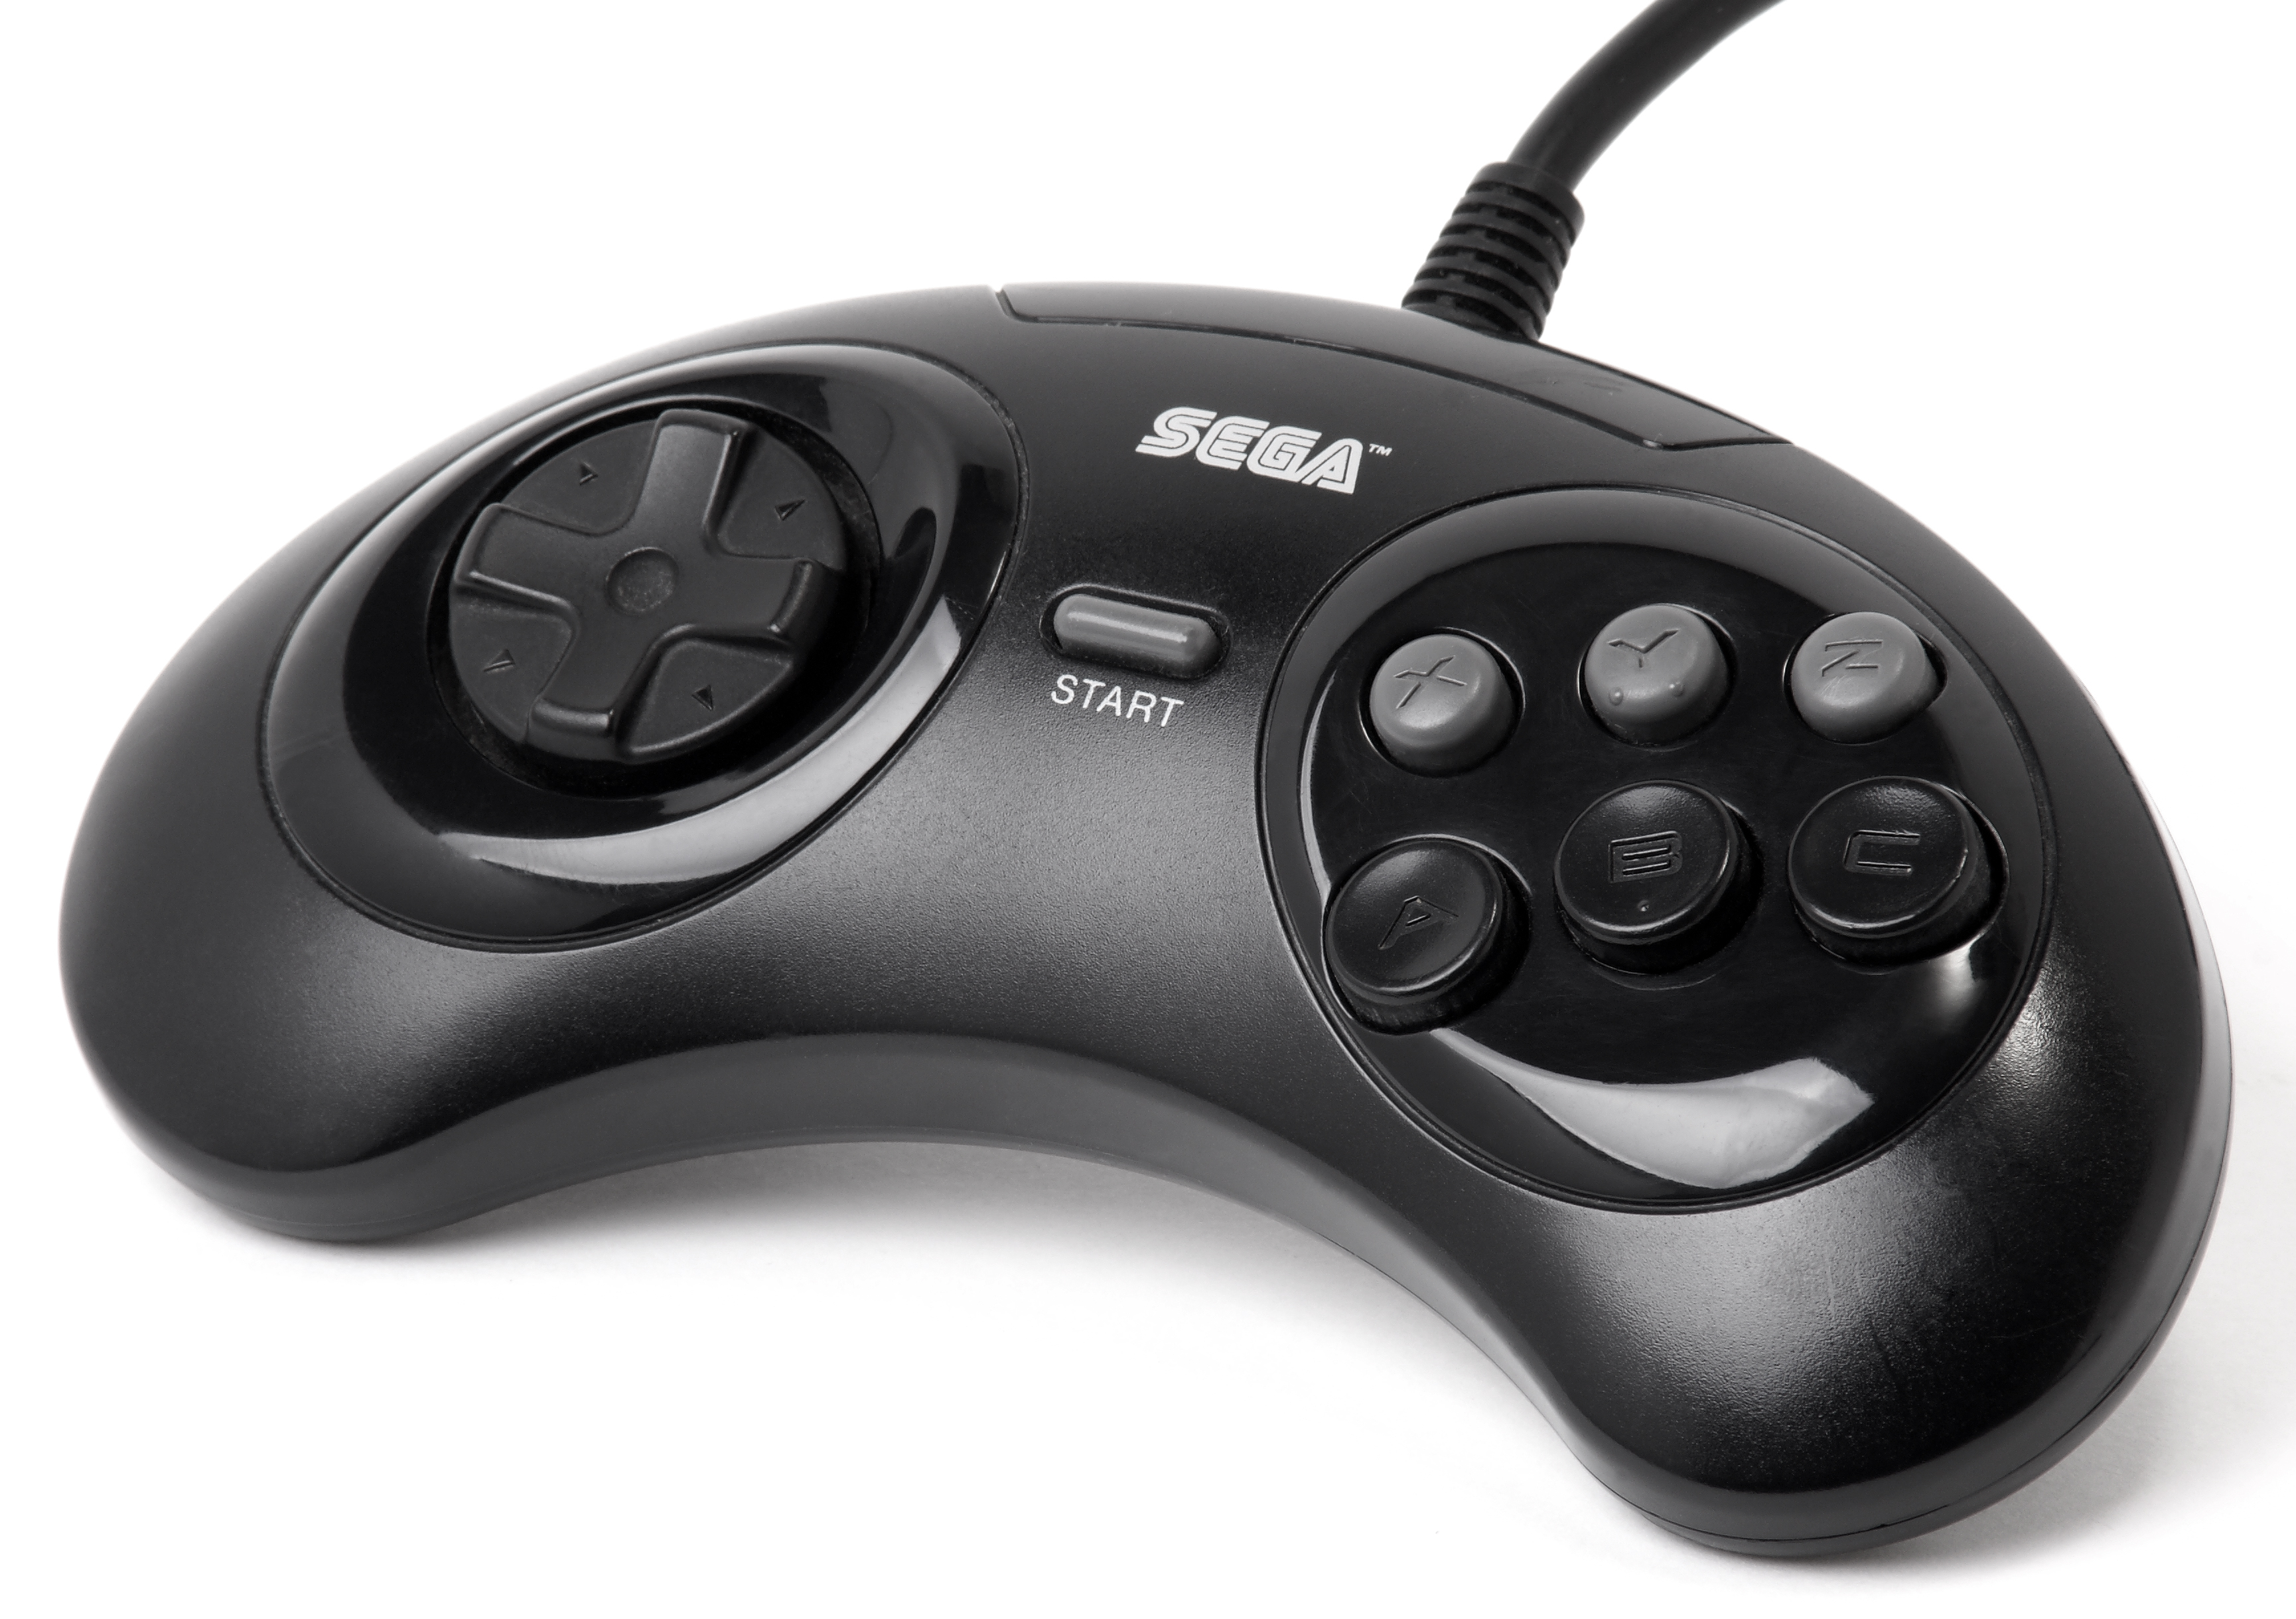 The Street Fighter Anniversary 6-button gamepad to gamecube